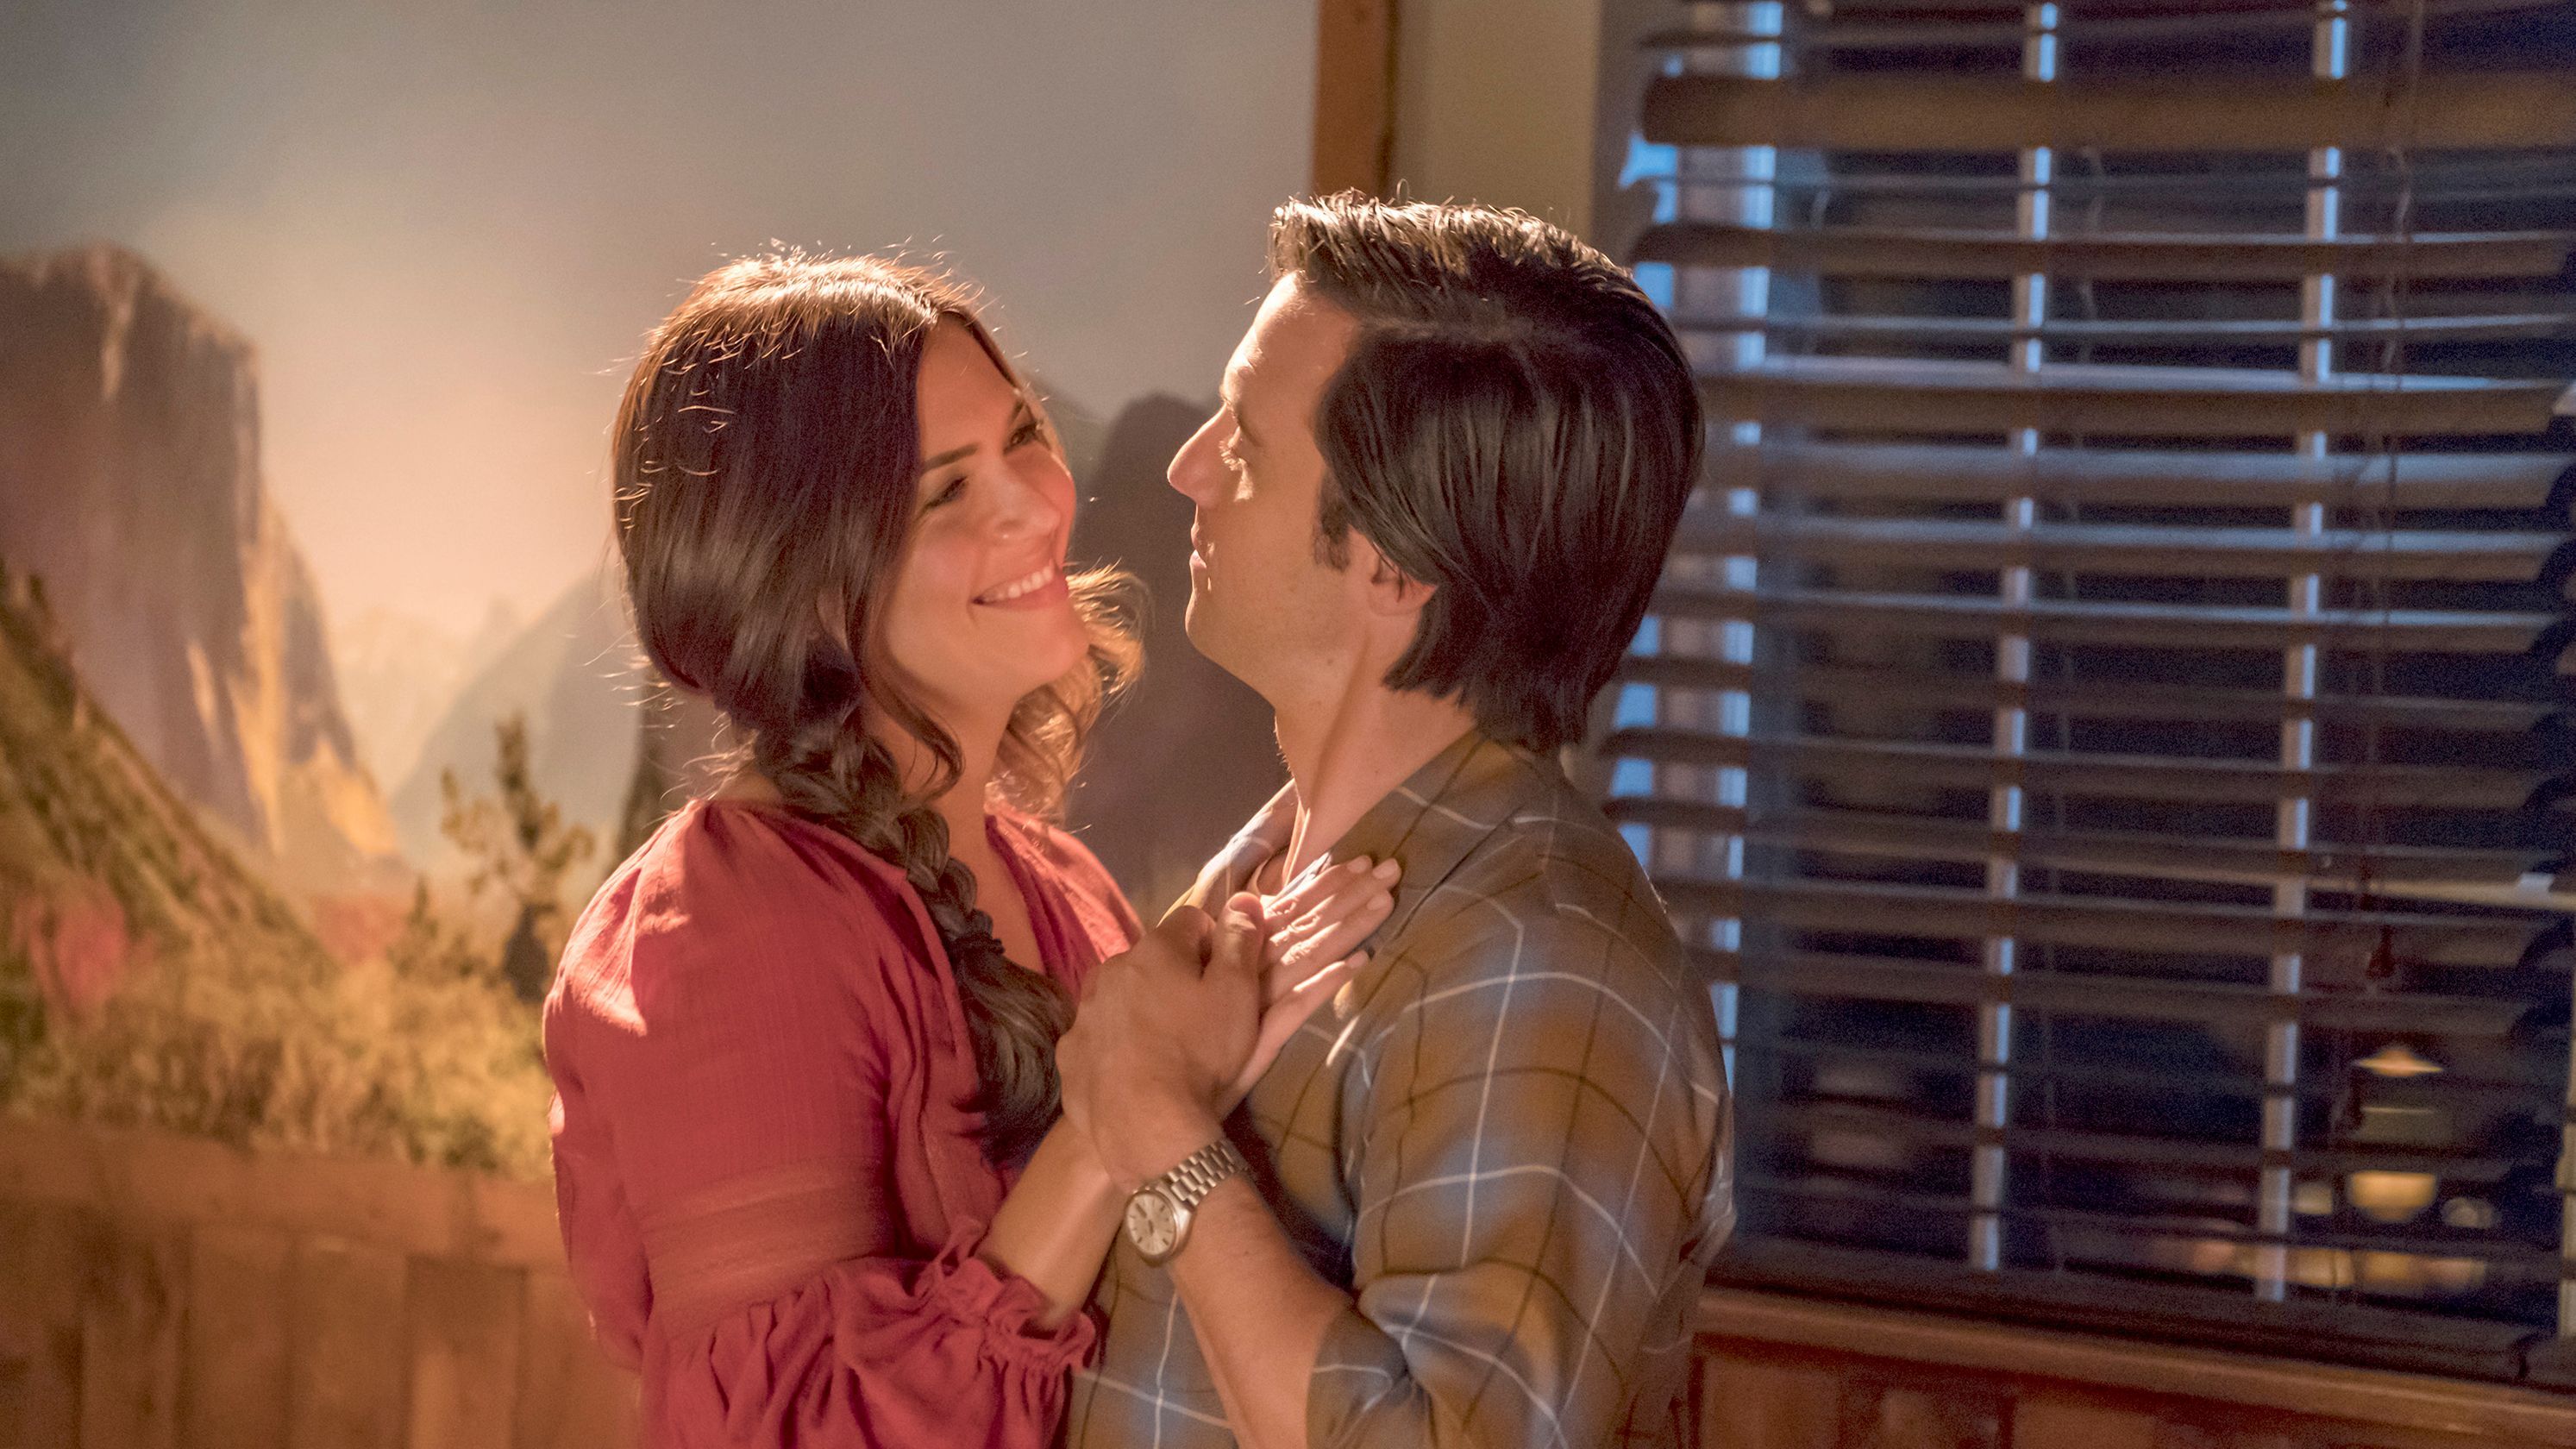 This Is Us: 5 Things That Changed After The Pilot (& 5 That Stayed The Same)